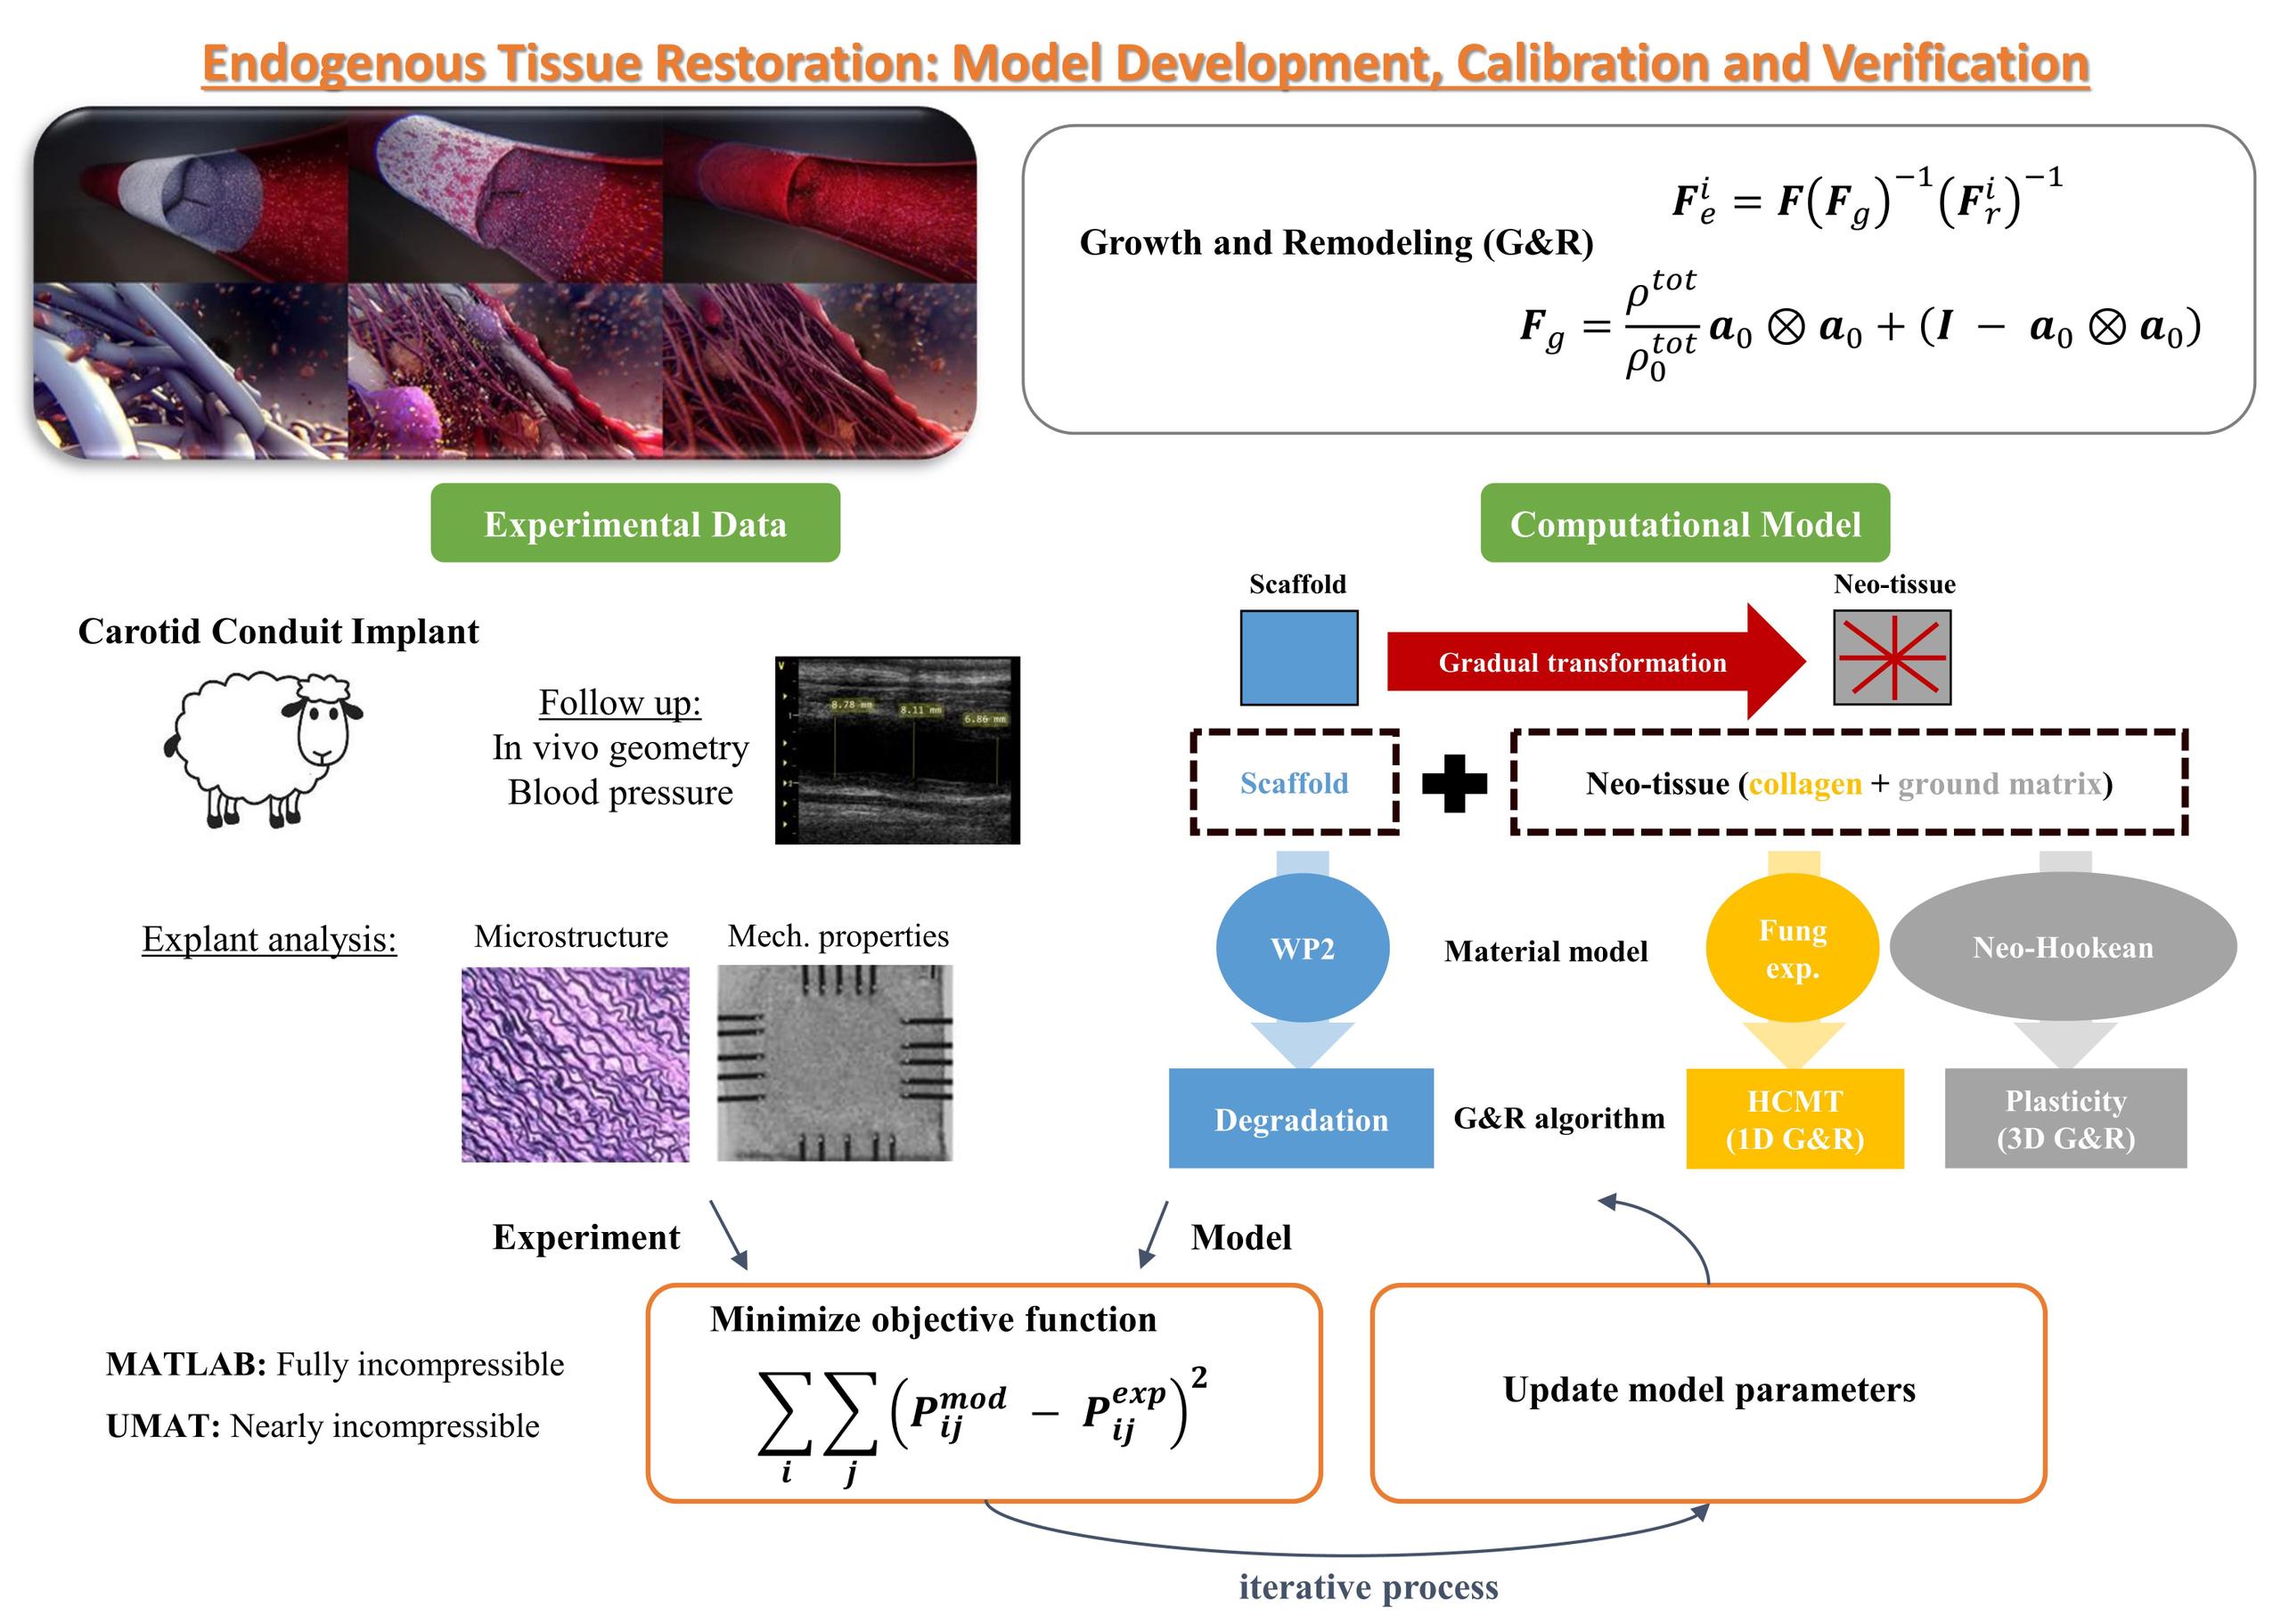 Modelling the Growth and Remodeling (G&R) of the Endogenous Tissue Restoration (ETR) In Xeltis Biodegradable Device